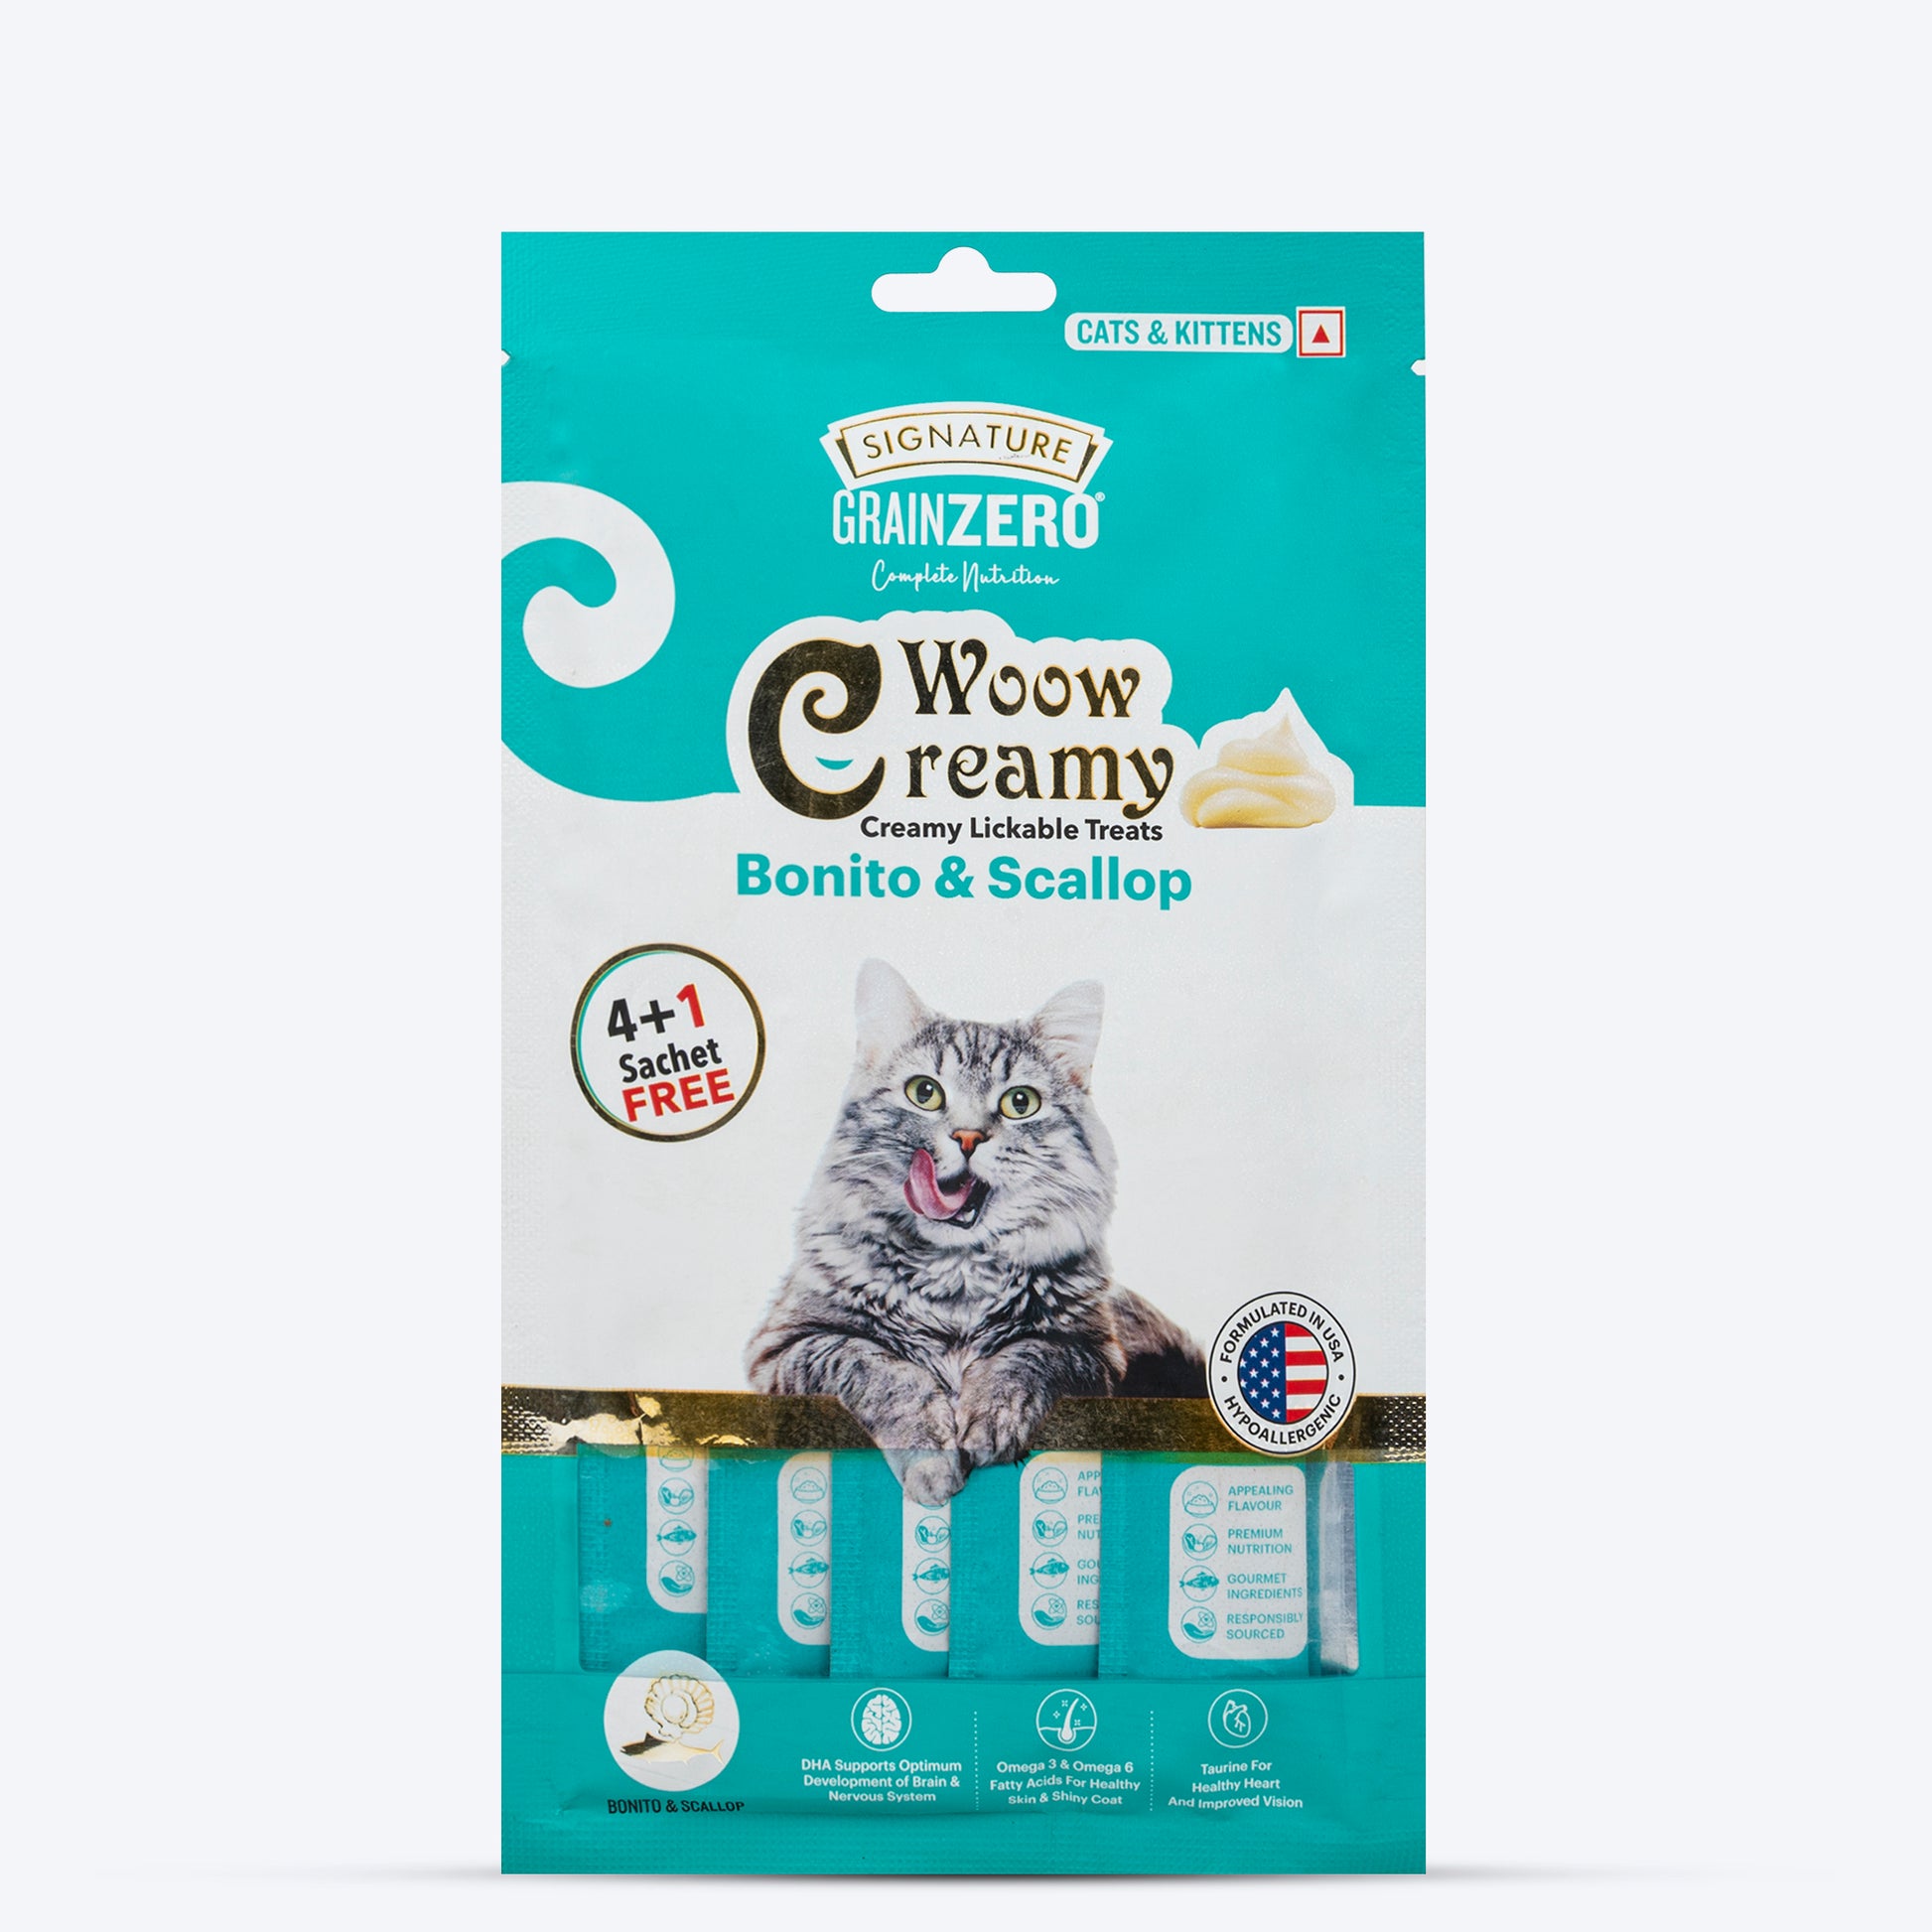 Signature Grain Zero Woow Creamy Bonito & Scallop Lickable Treats For Cat & Kitten - 75 g - Heads Up For Tails